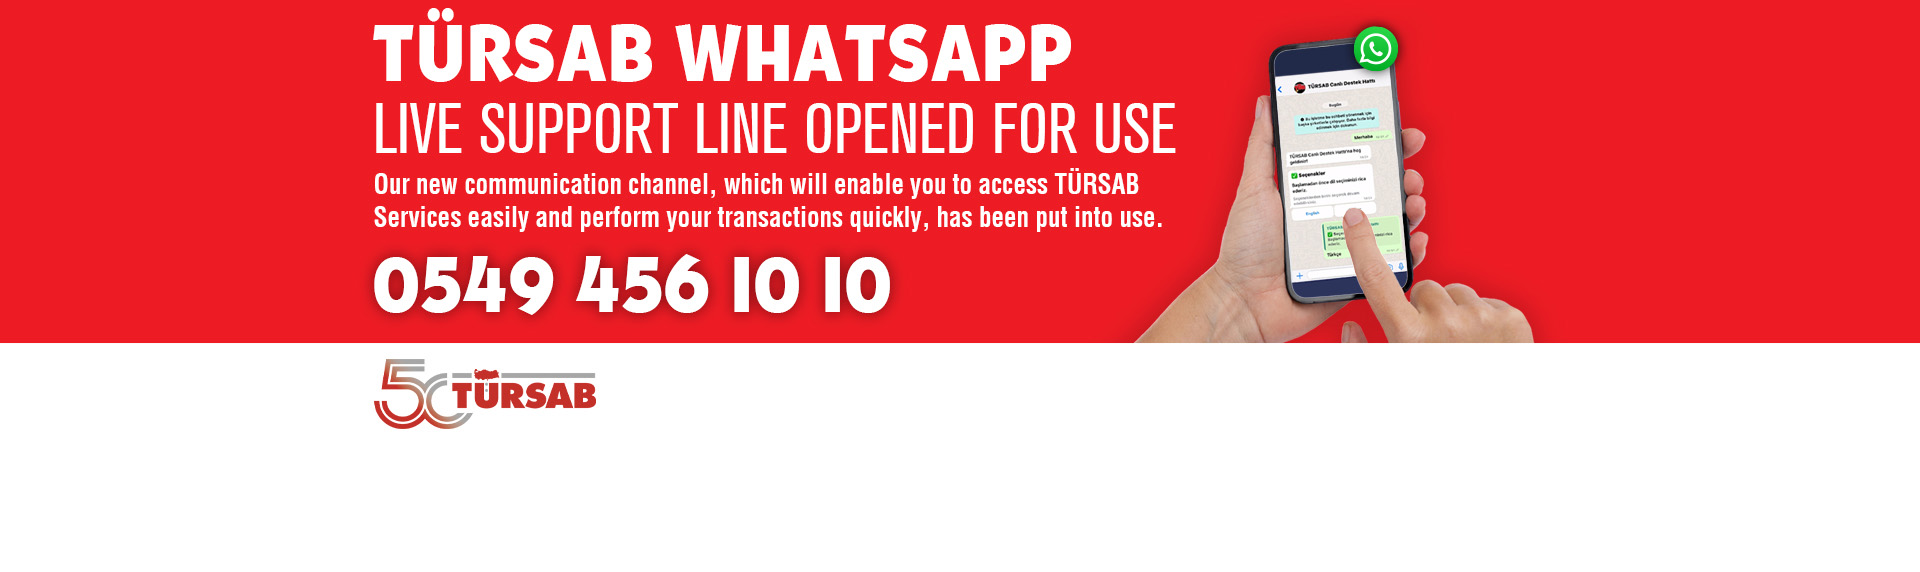 https://www.tursab.org.tr/announcements/tursab-whatsapp-live-support-line-opened-for-use